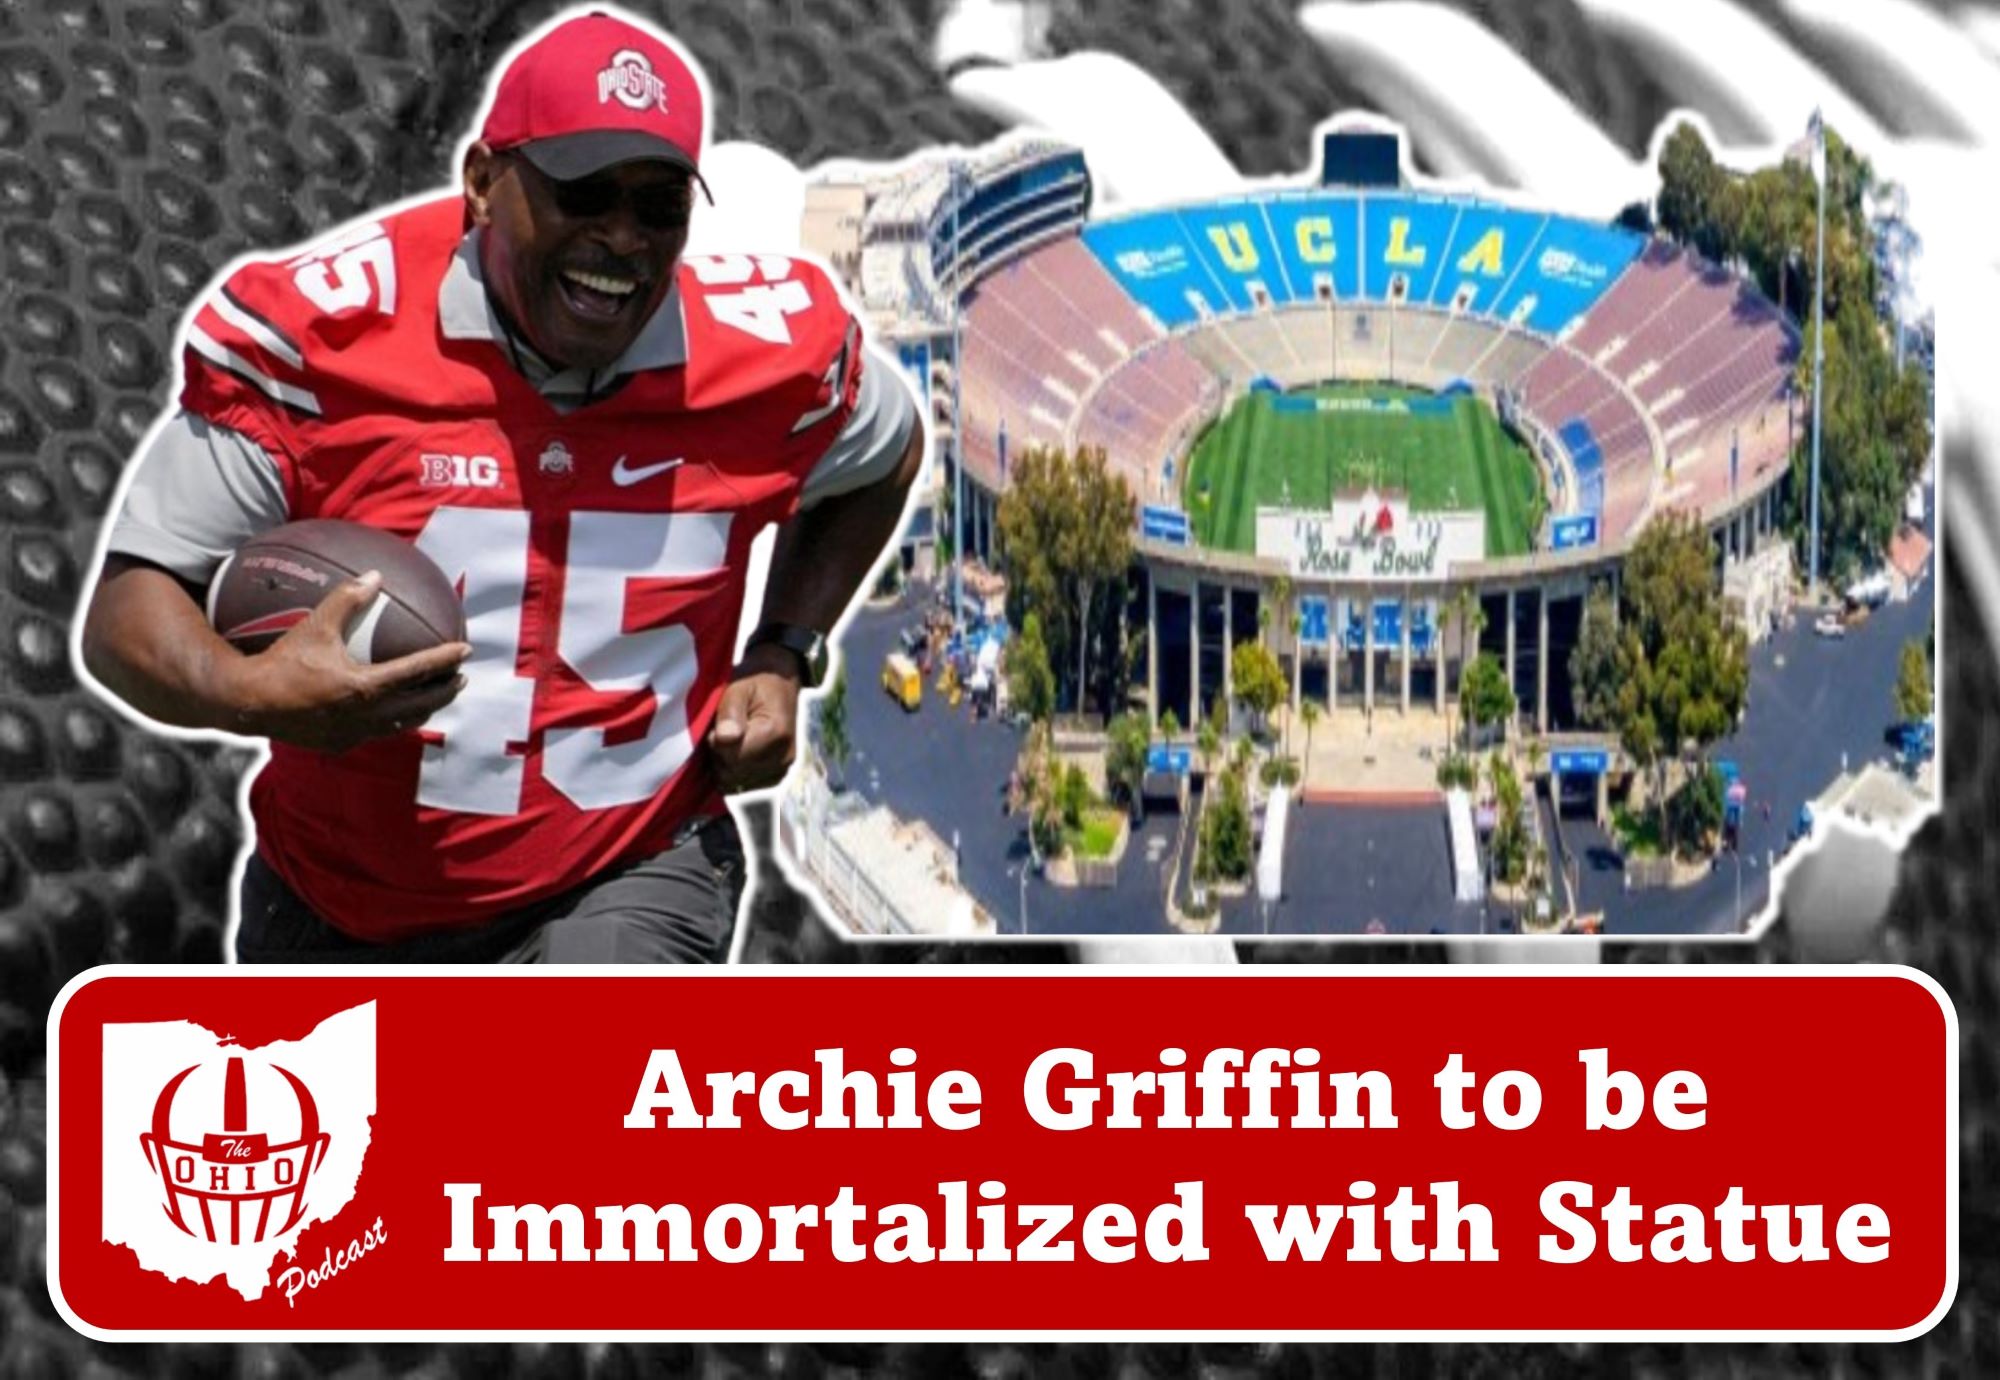 Archie Griffin to be Immortalized with Statue at the Rose Bowl Stadium